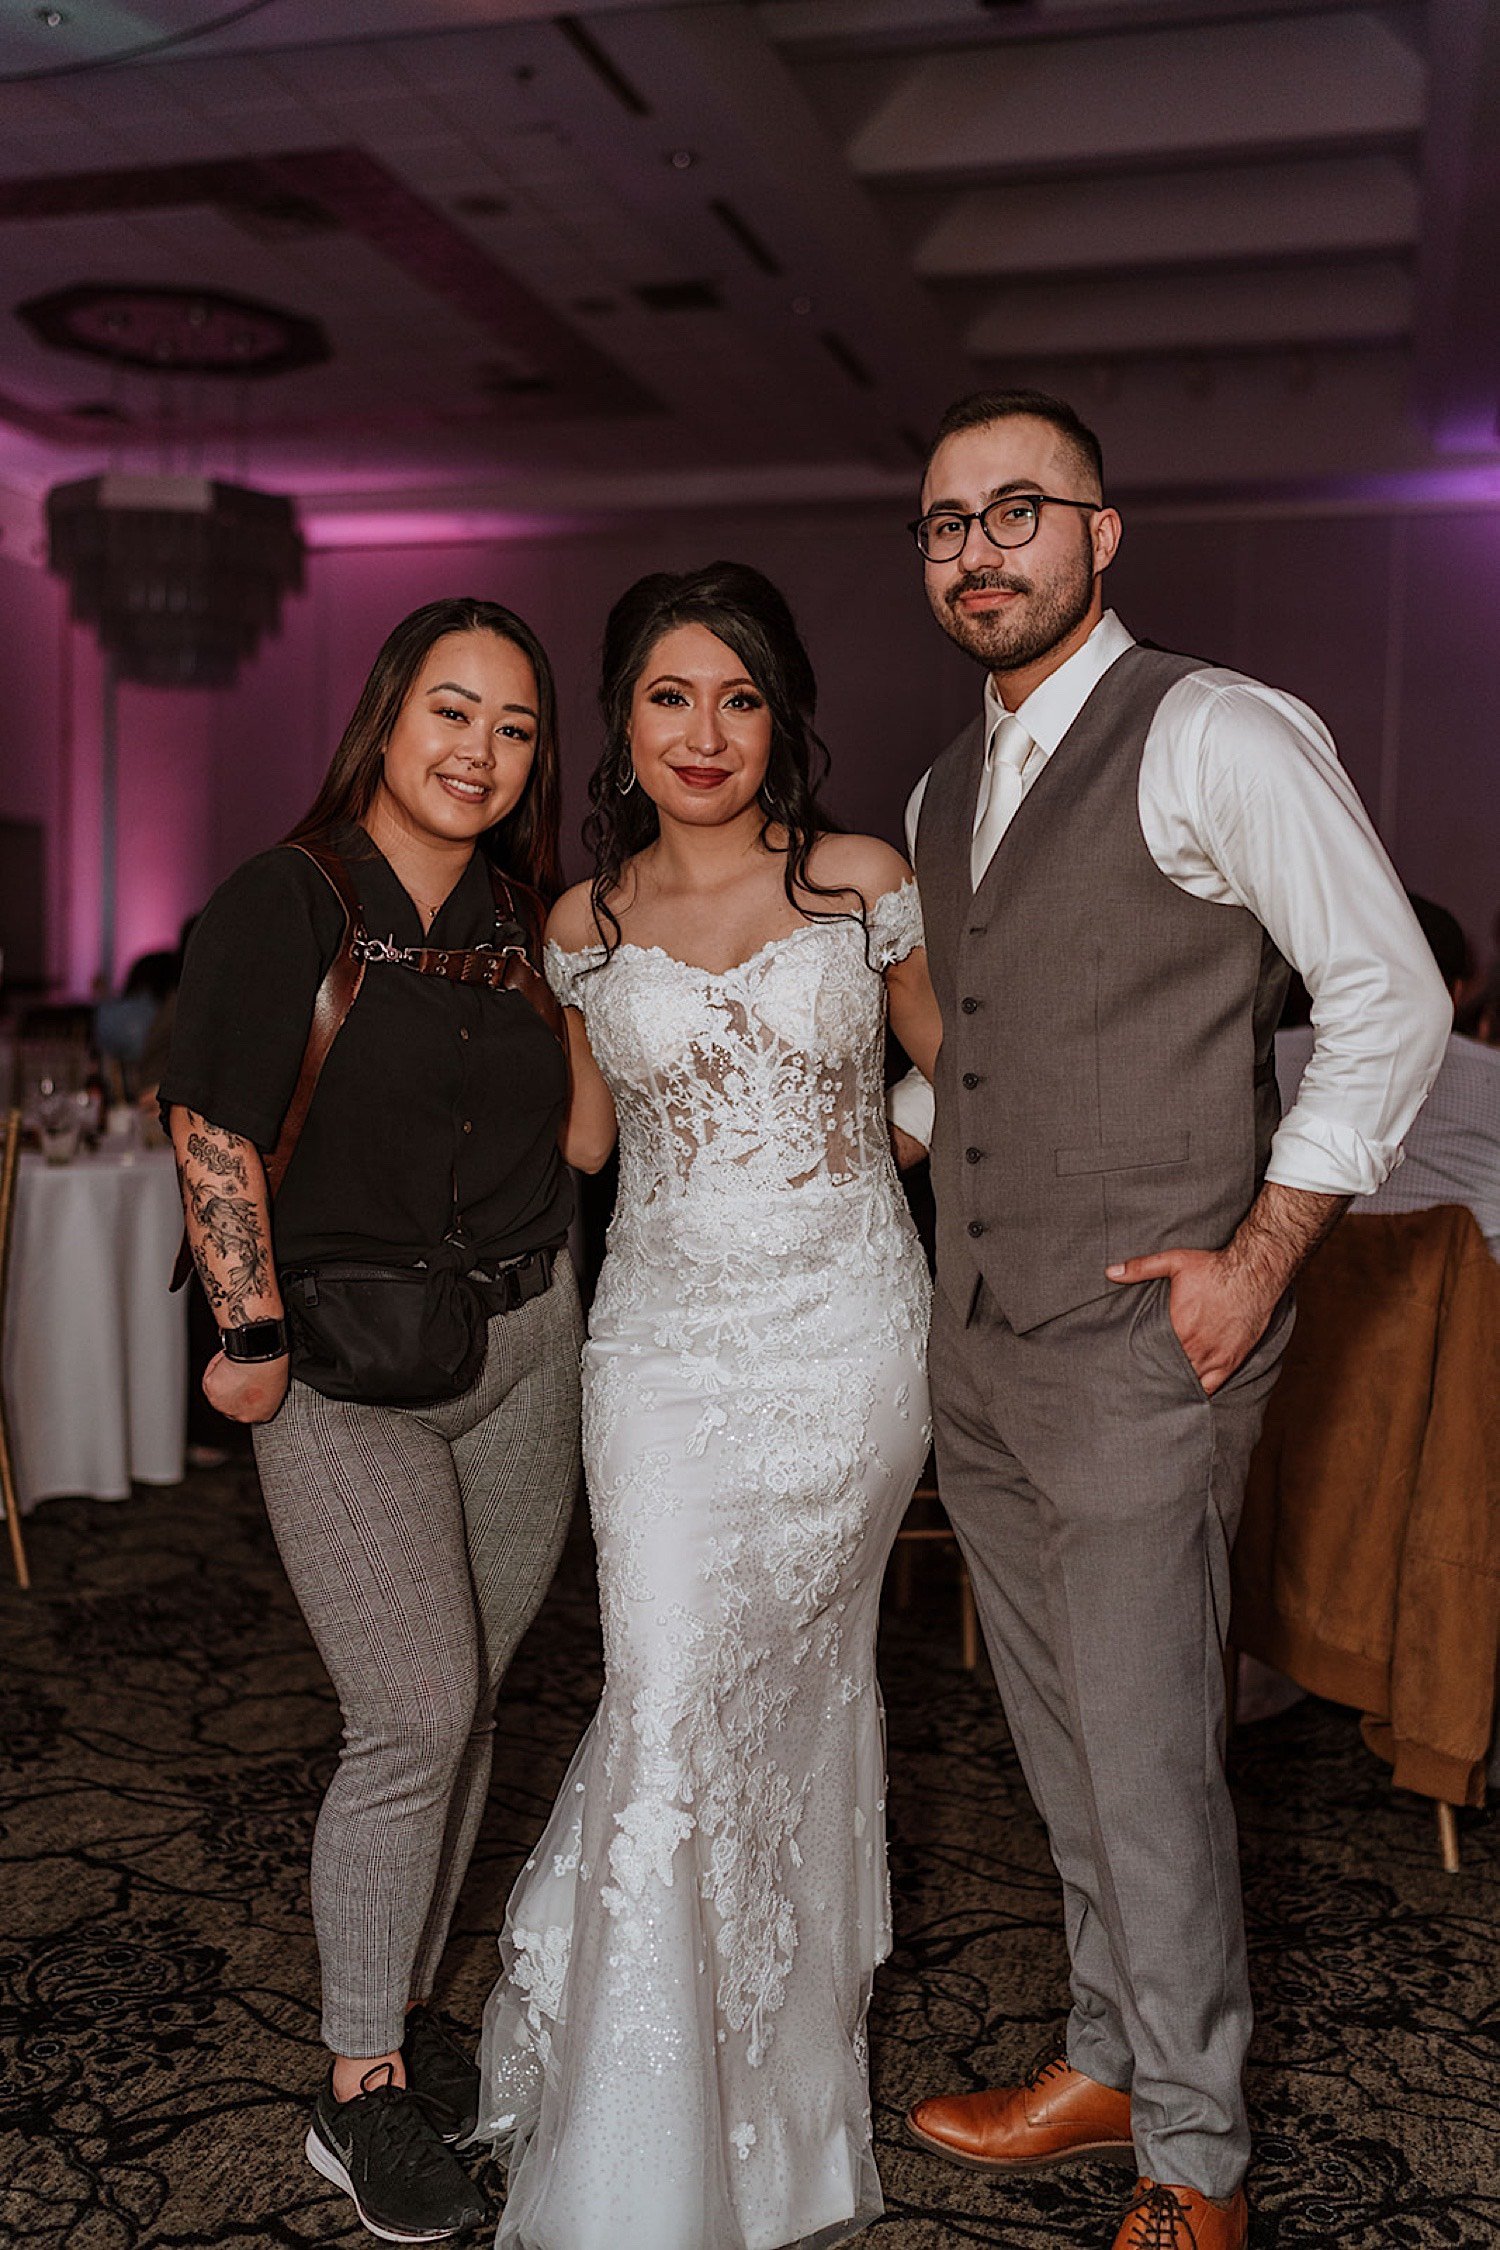 Bride and groom pose with wedding photographer after their Chicagoland ballroom wedding